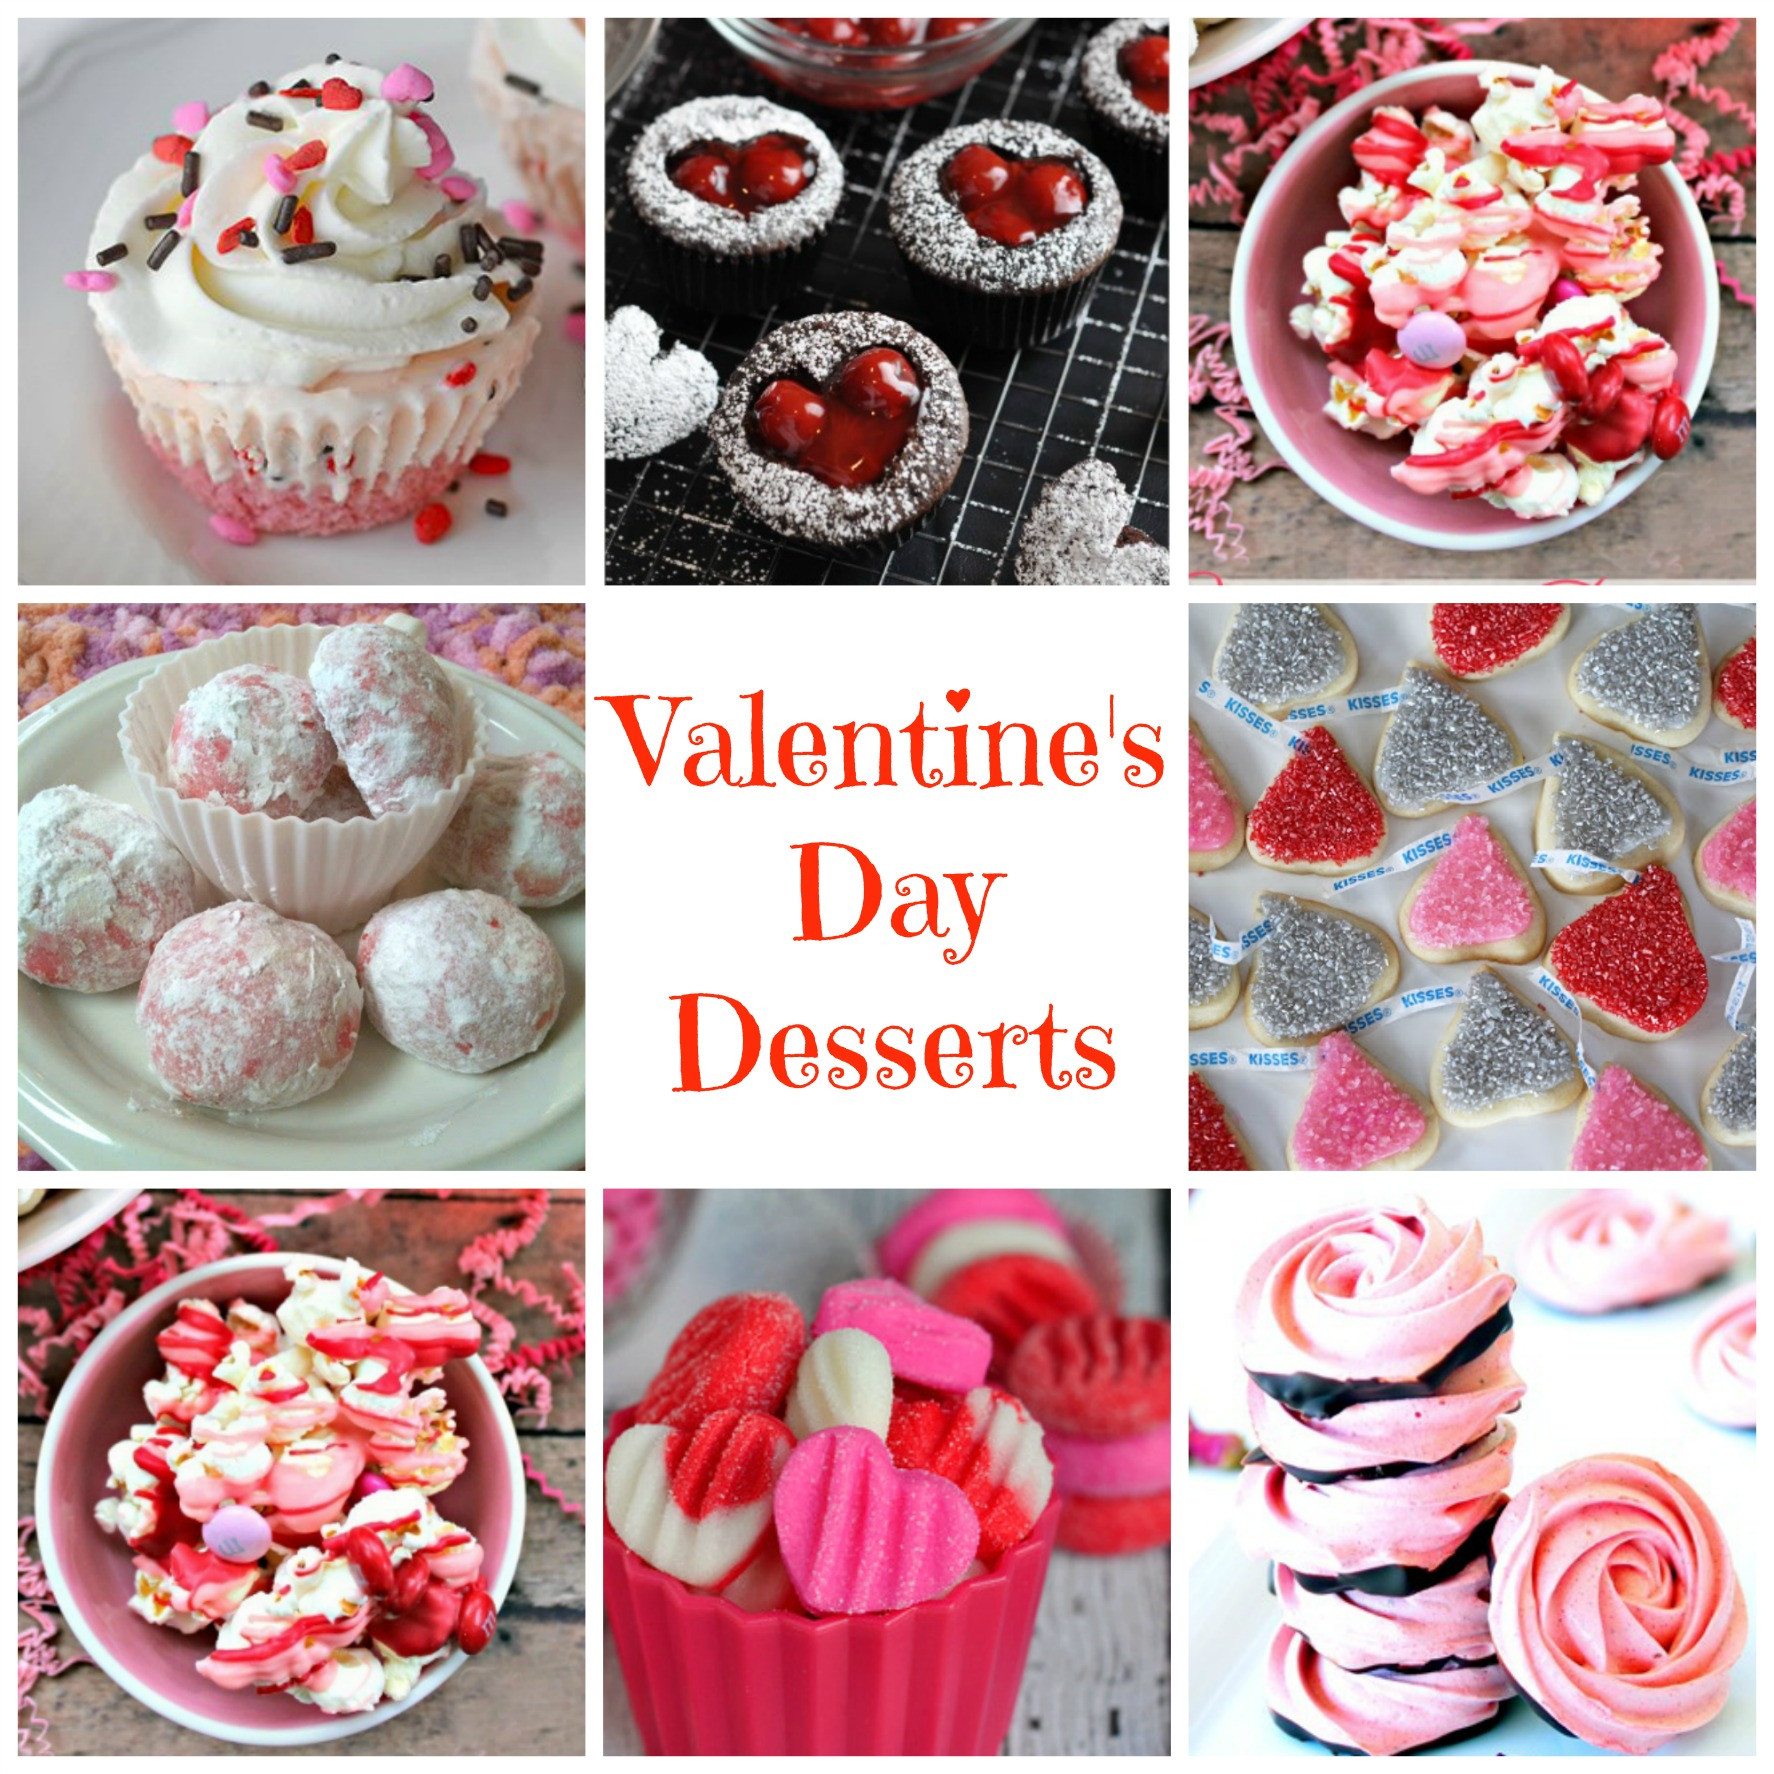 Recipes For Valentine'S Day Desserts
 10 Valentine s Day Desserts Making Time for Mommy